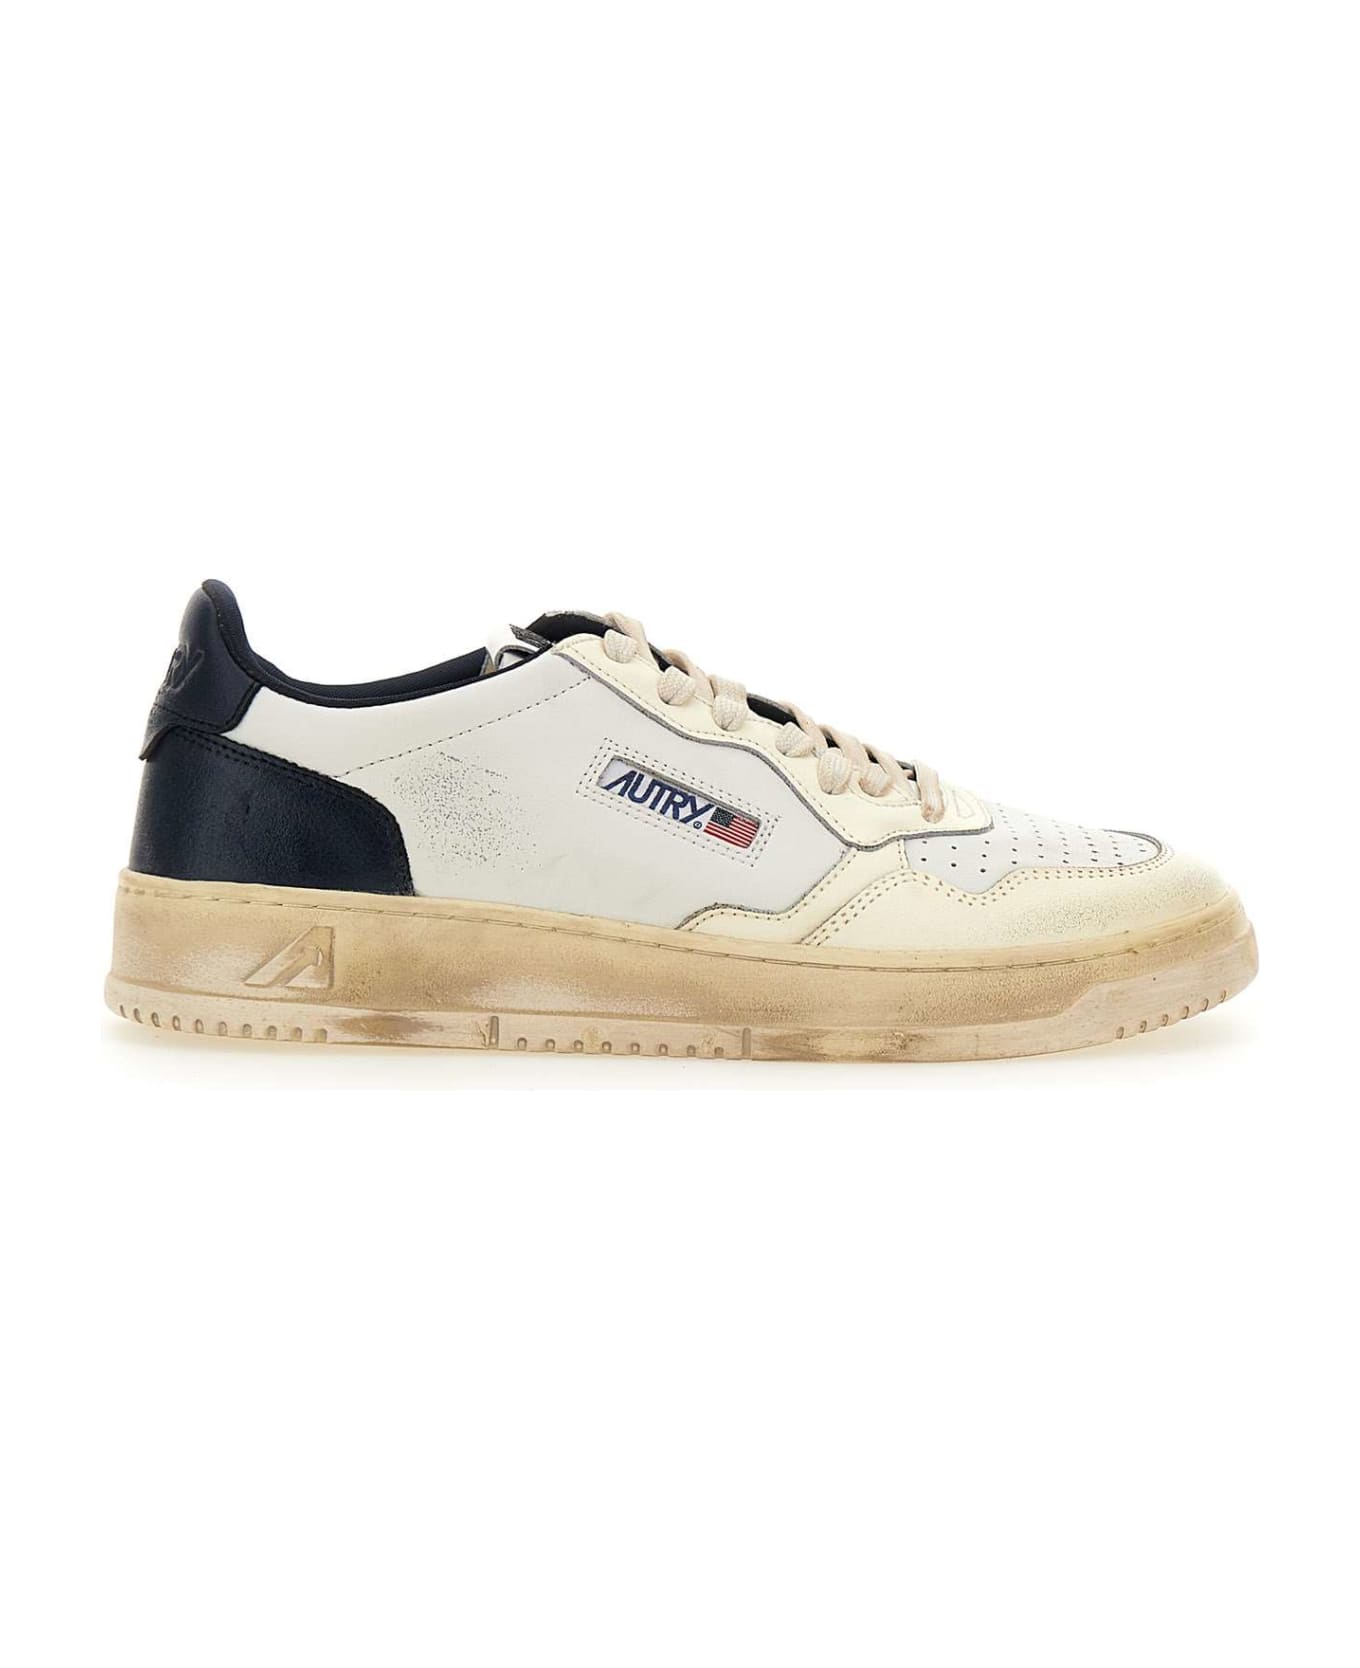 Autry "avlm Sv32" Sneakers Leather - WHITE-BLACK